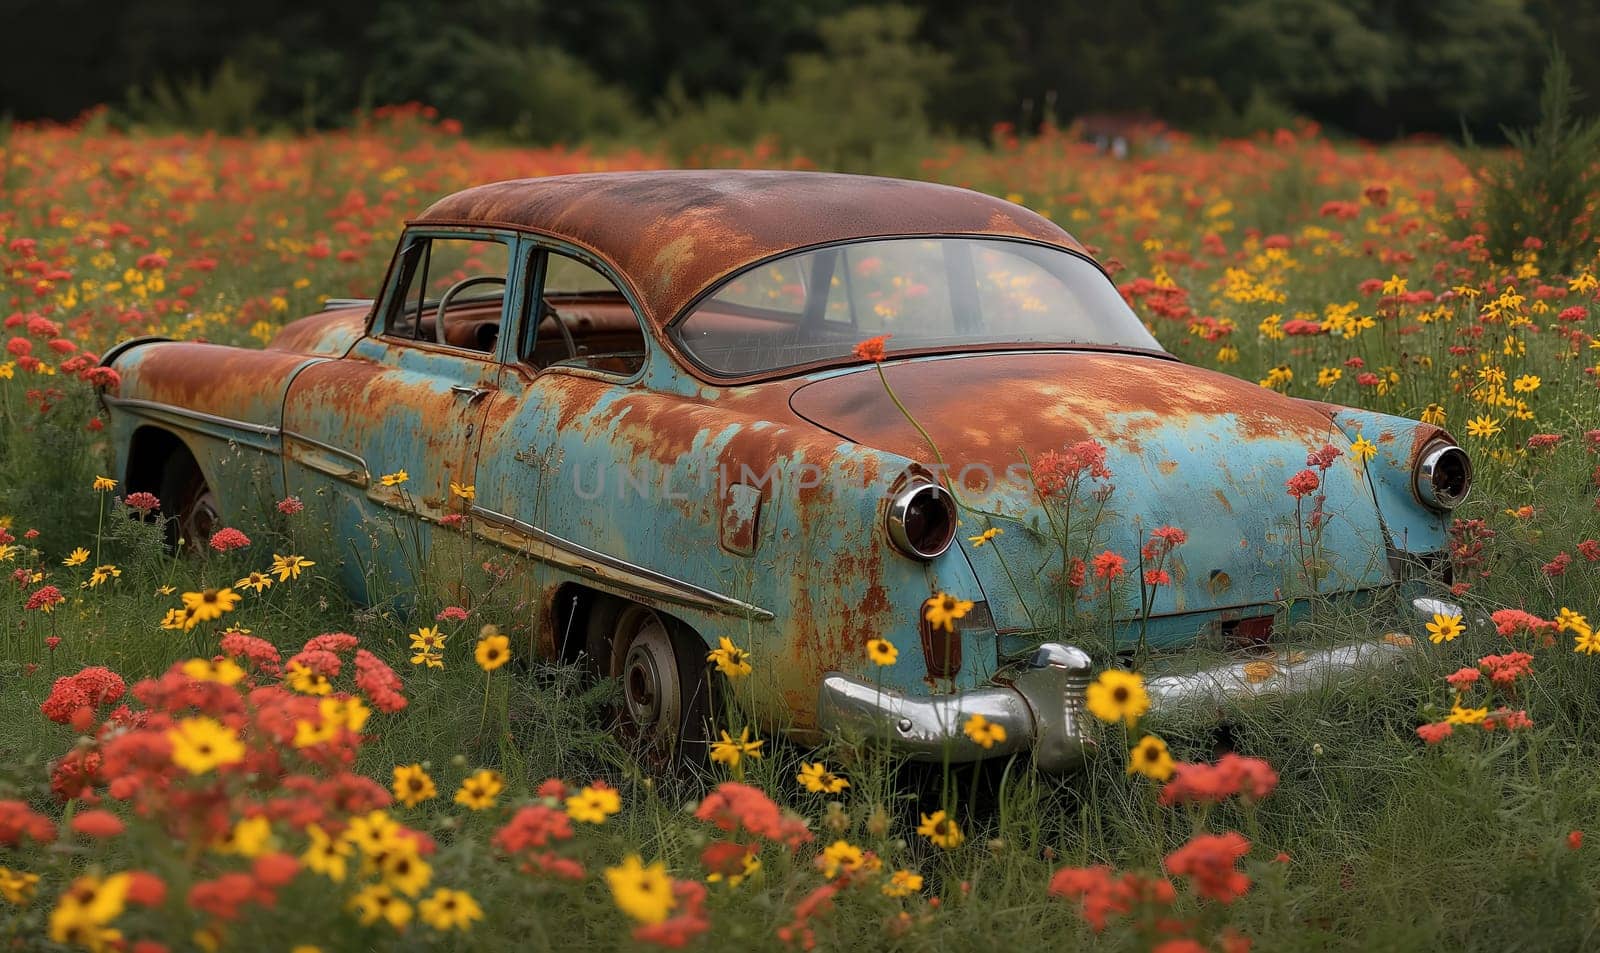 An old red car in a field surrounded by flowers. Selective focus